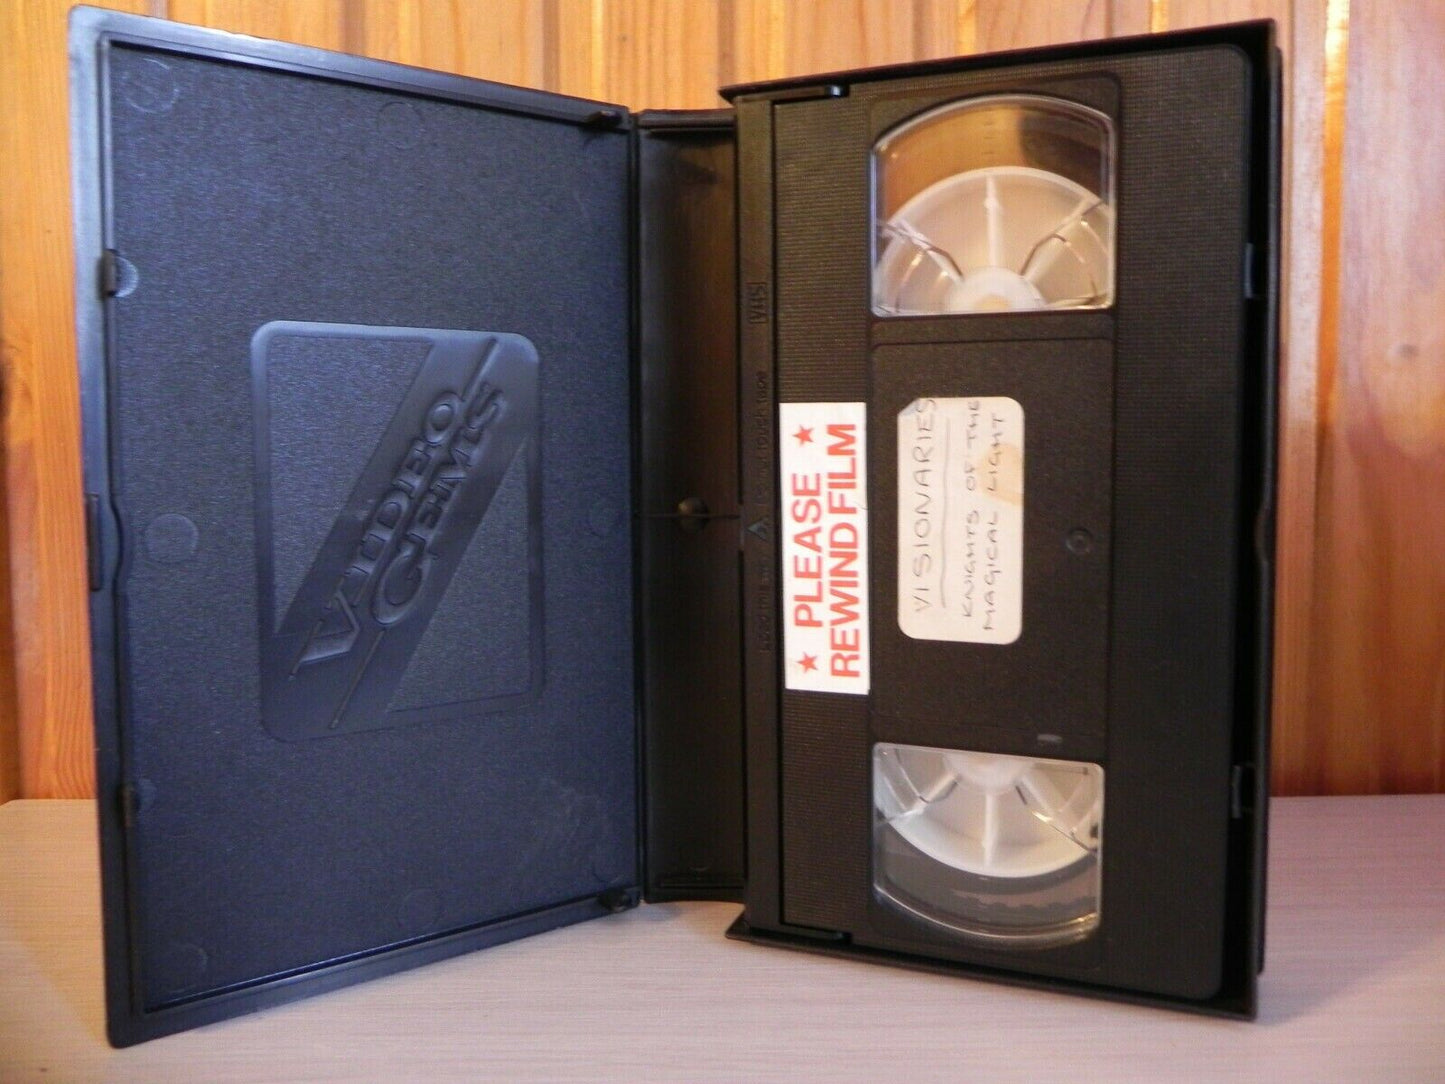 VISIONARIES - KNIGHTS OF THE MAGICAL LIGHT - KIDS VIDEO - 1987 VIDEO GEMS - VHS-